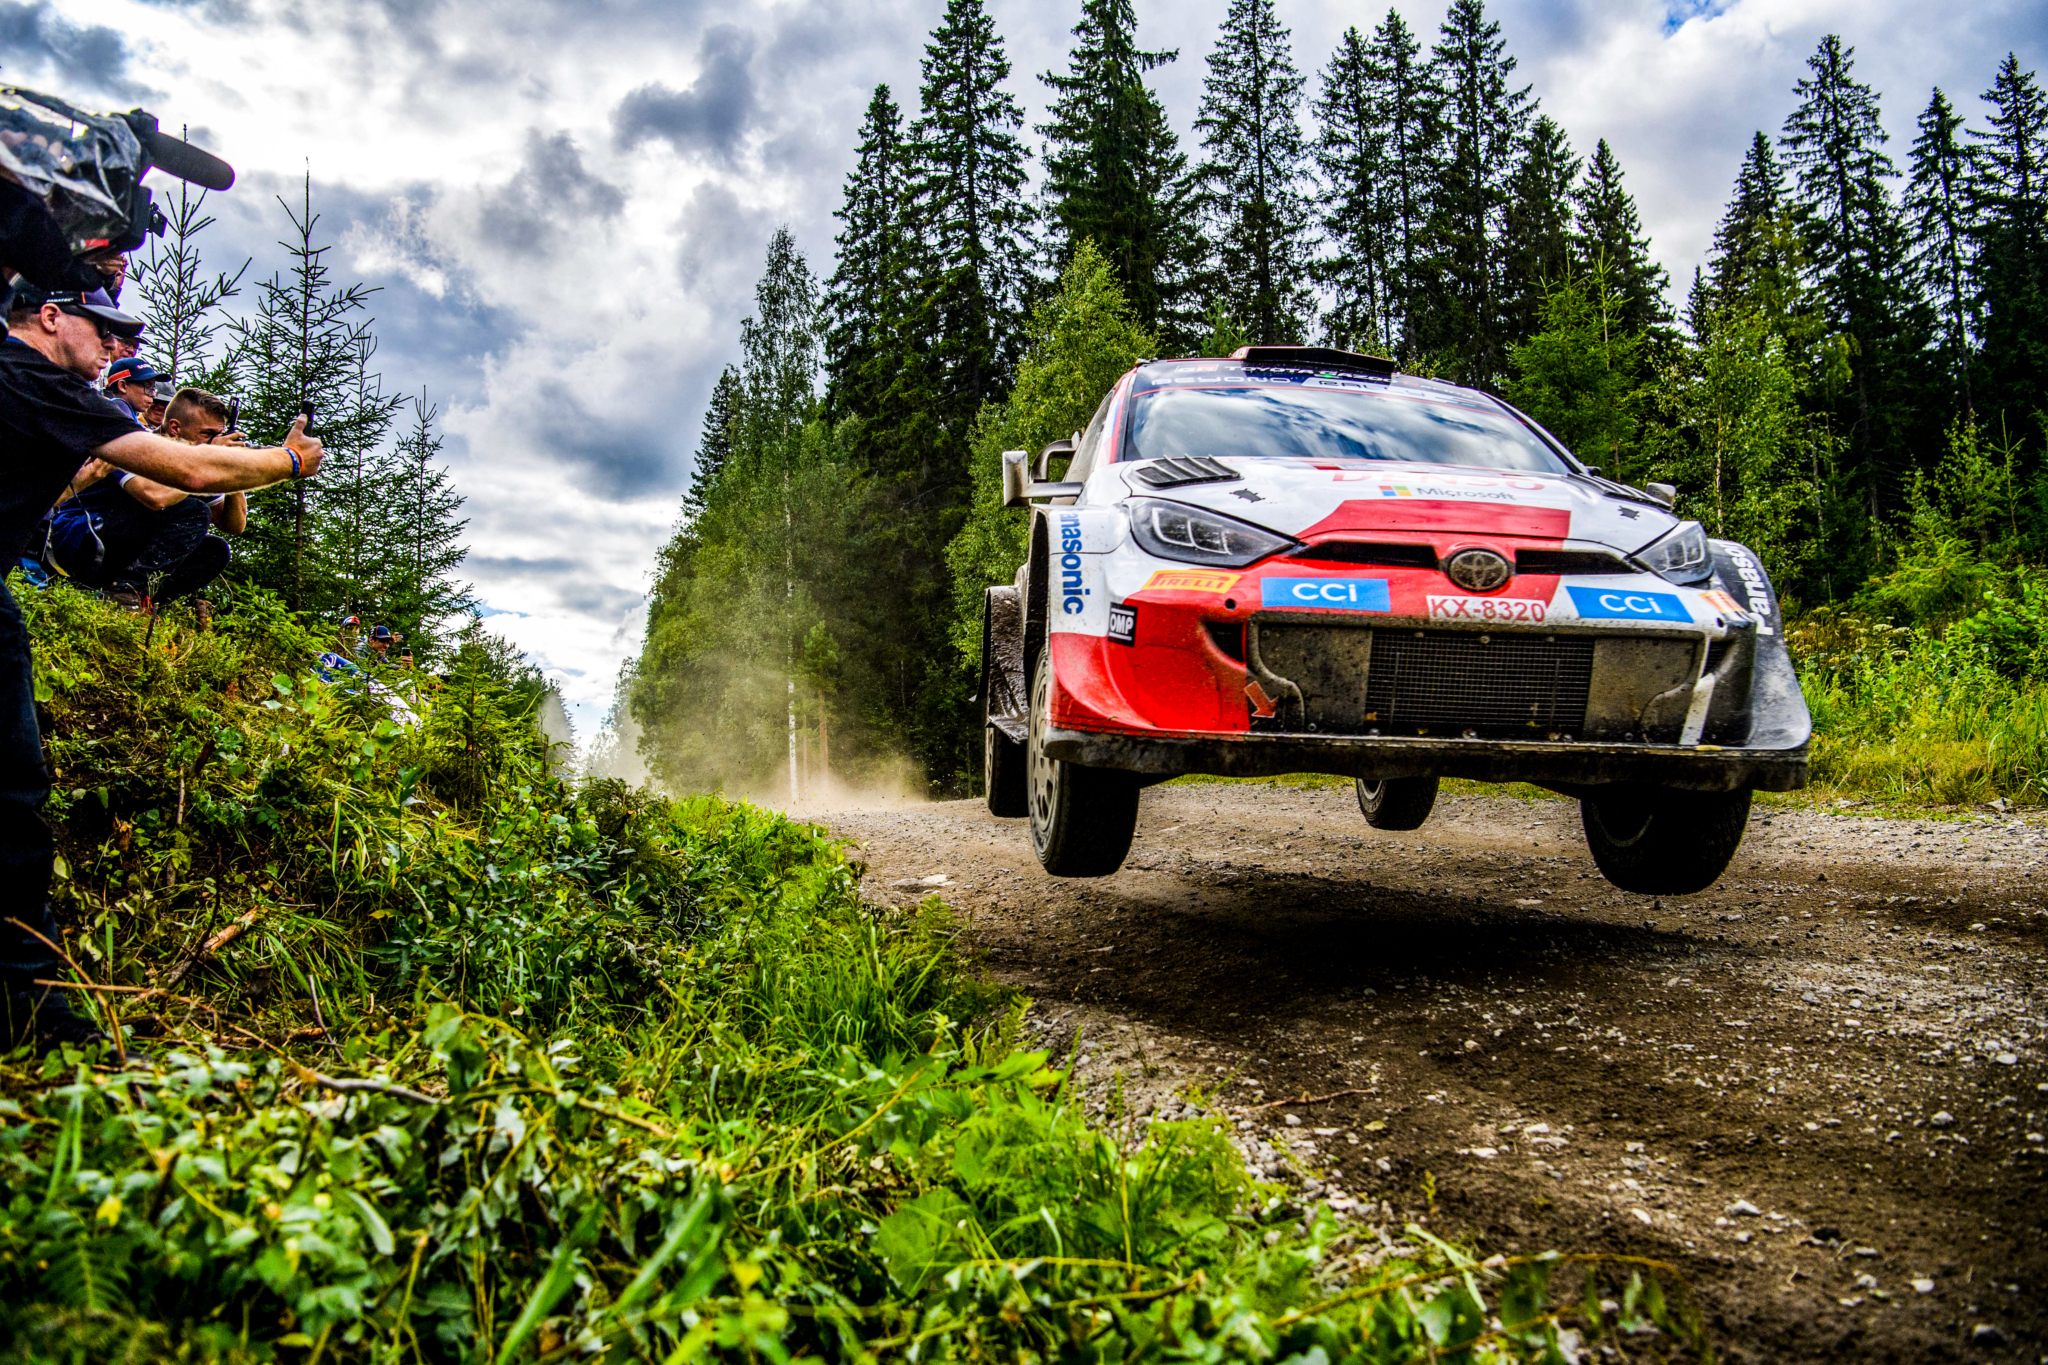 Elfyn Evans wins Rally Finland as FIA, Pirelli devise plan for more challenging tyre management